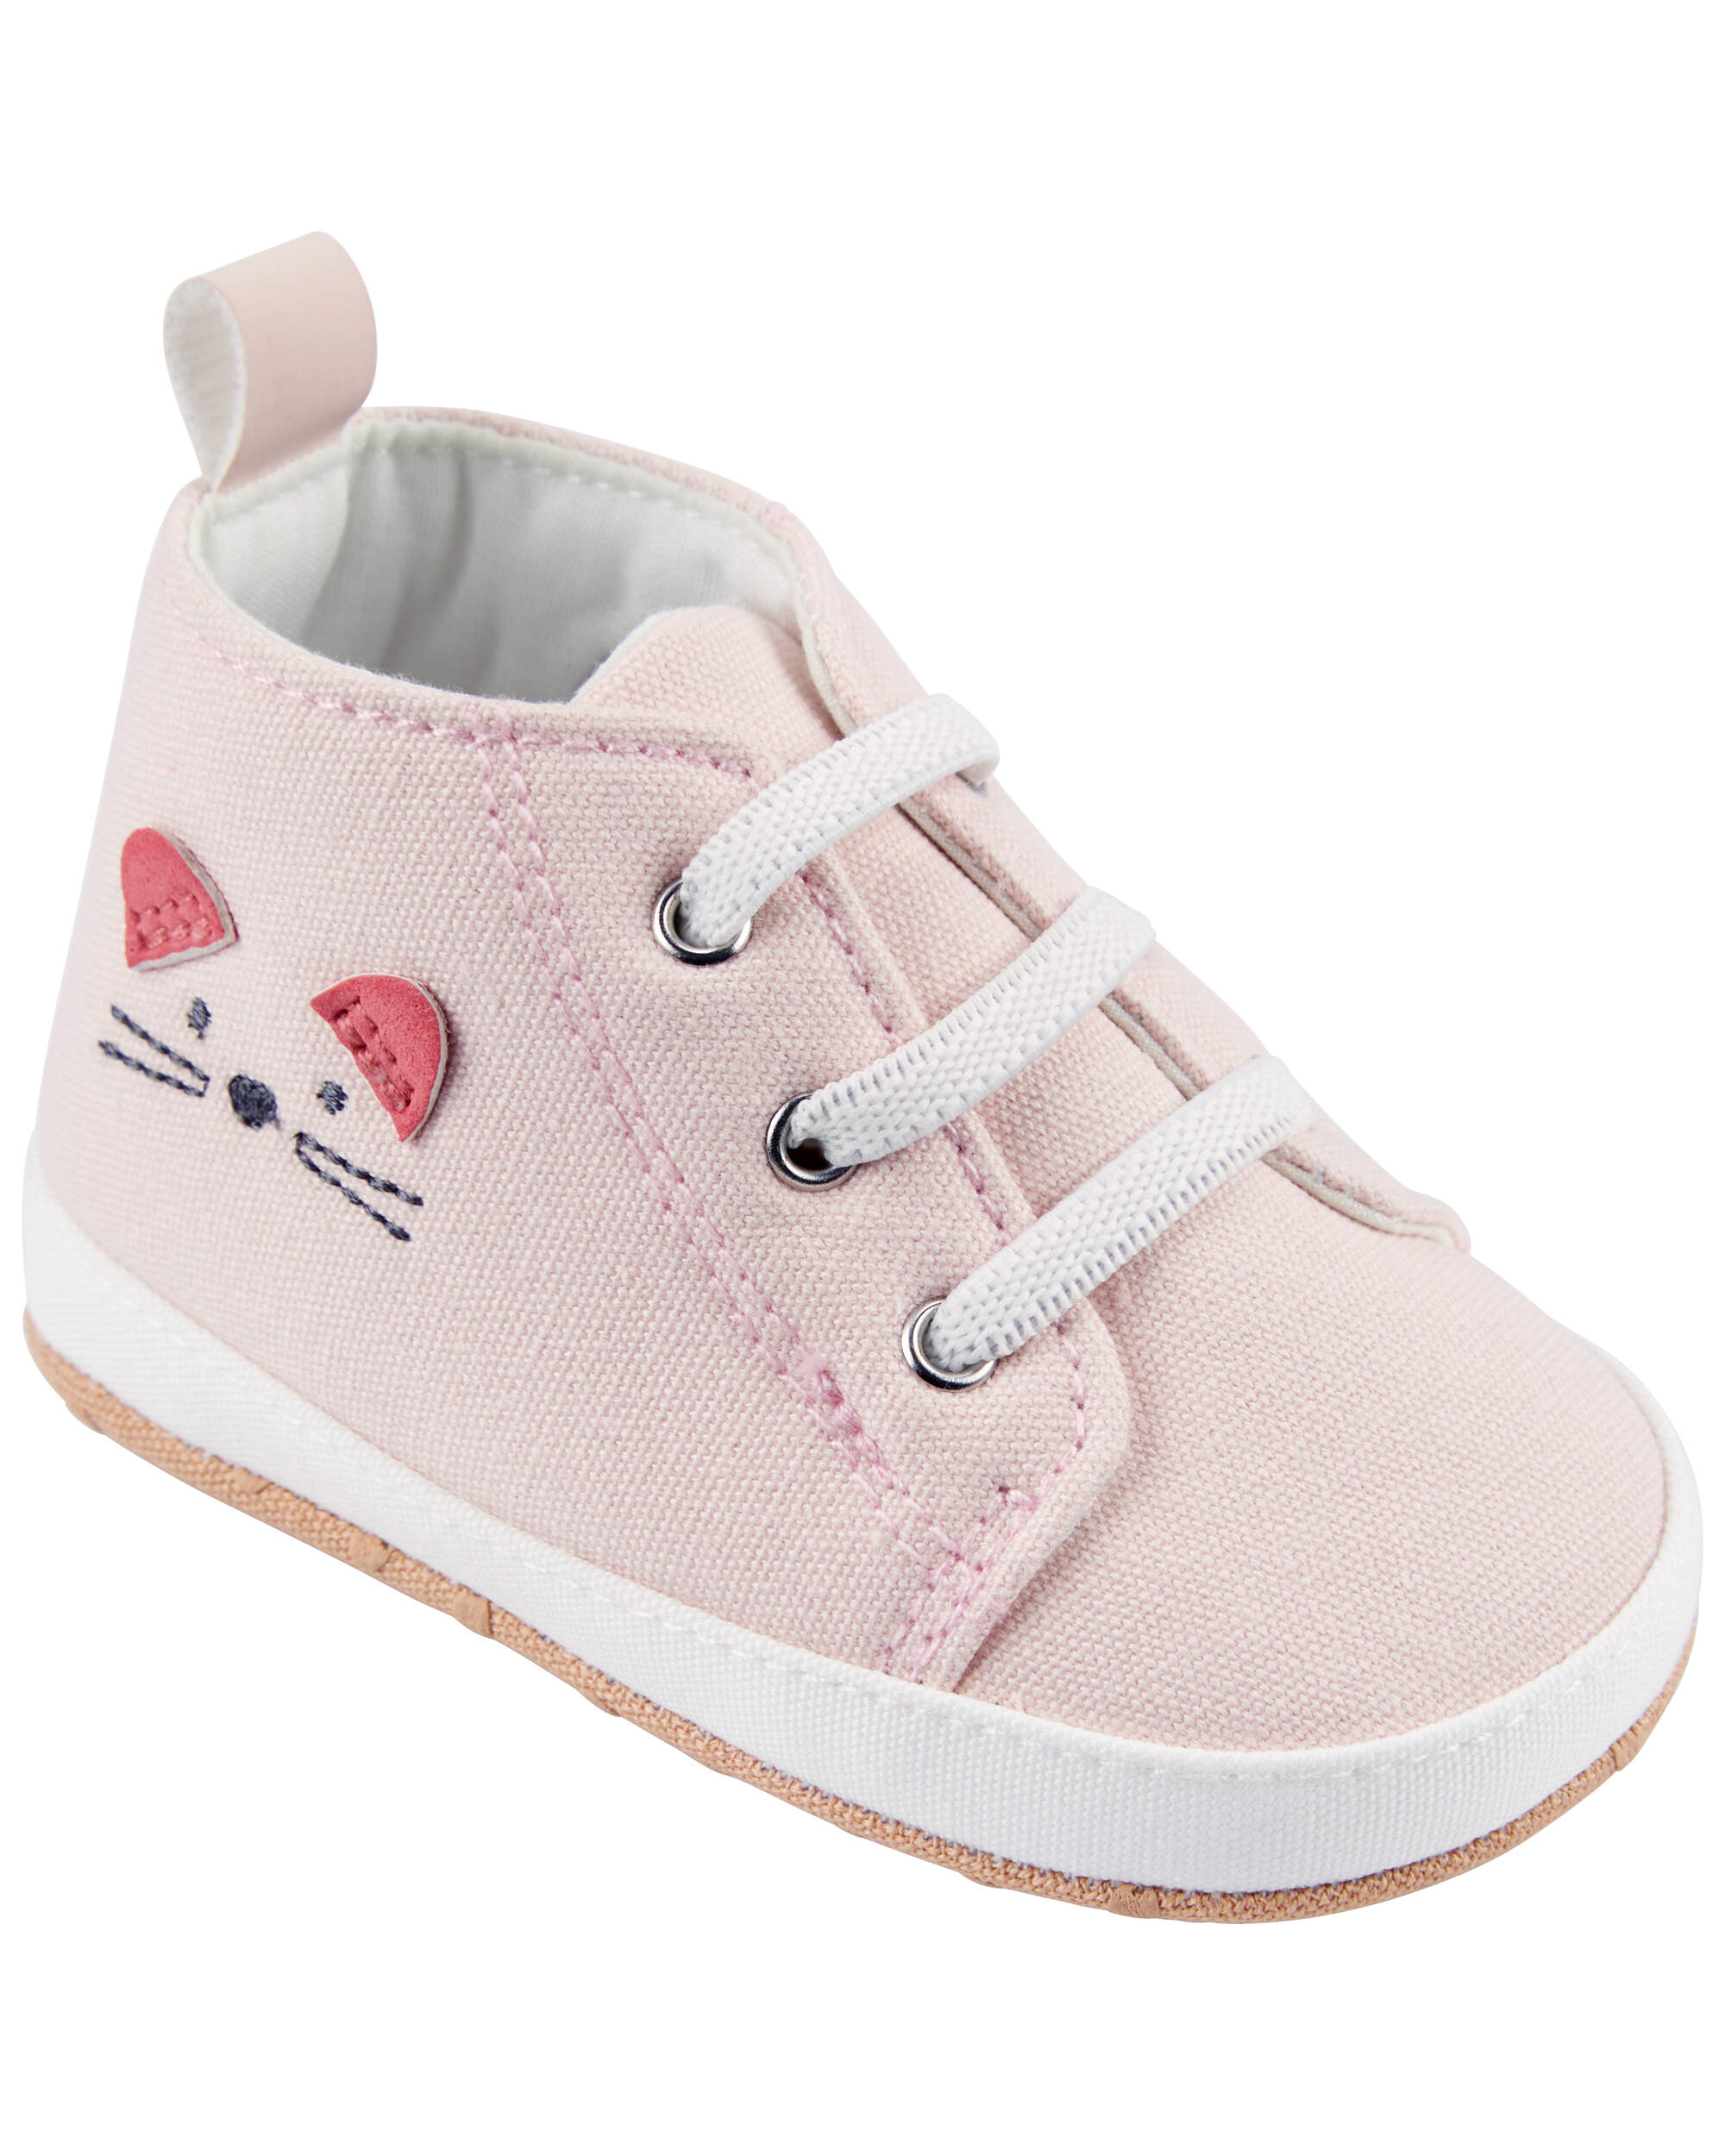 Baby Cat High Top Sneaker Shoes